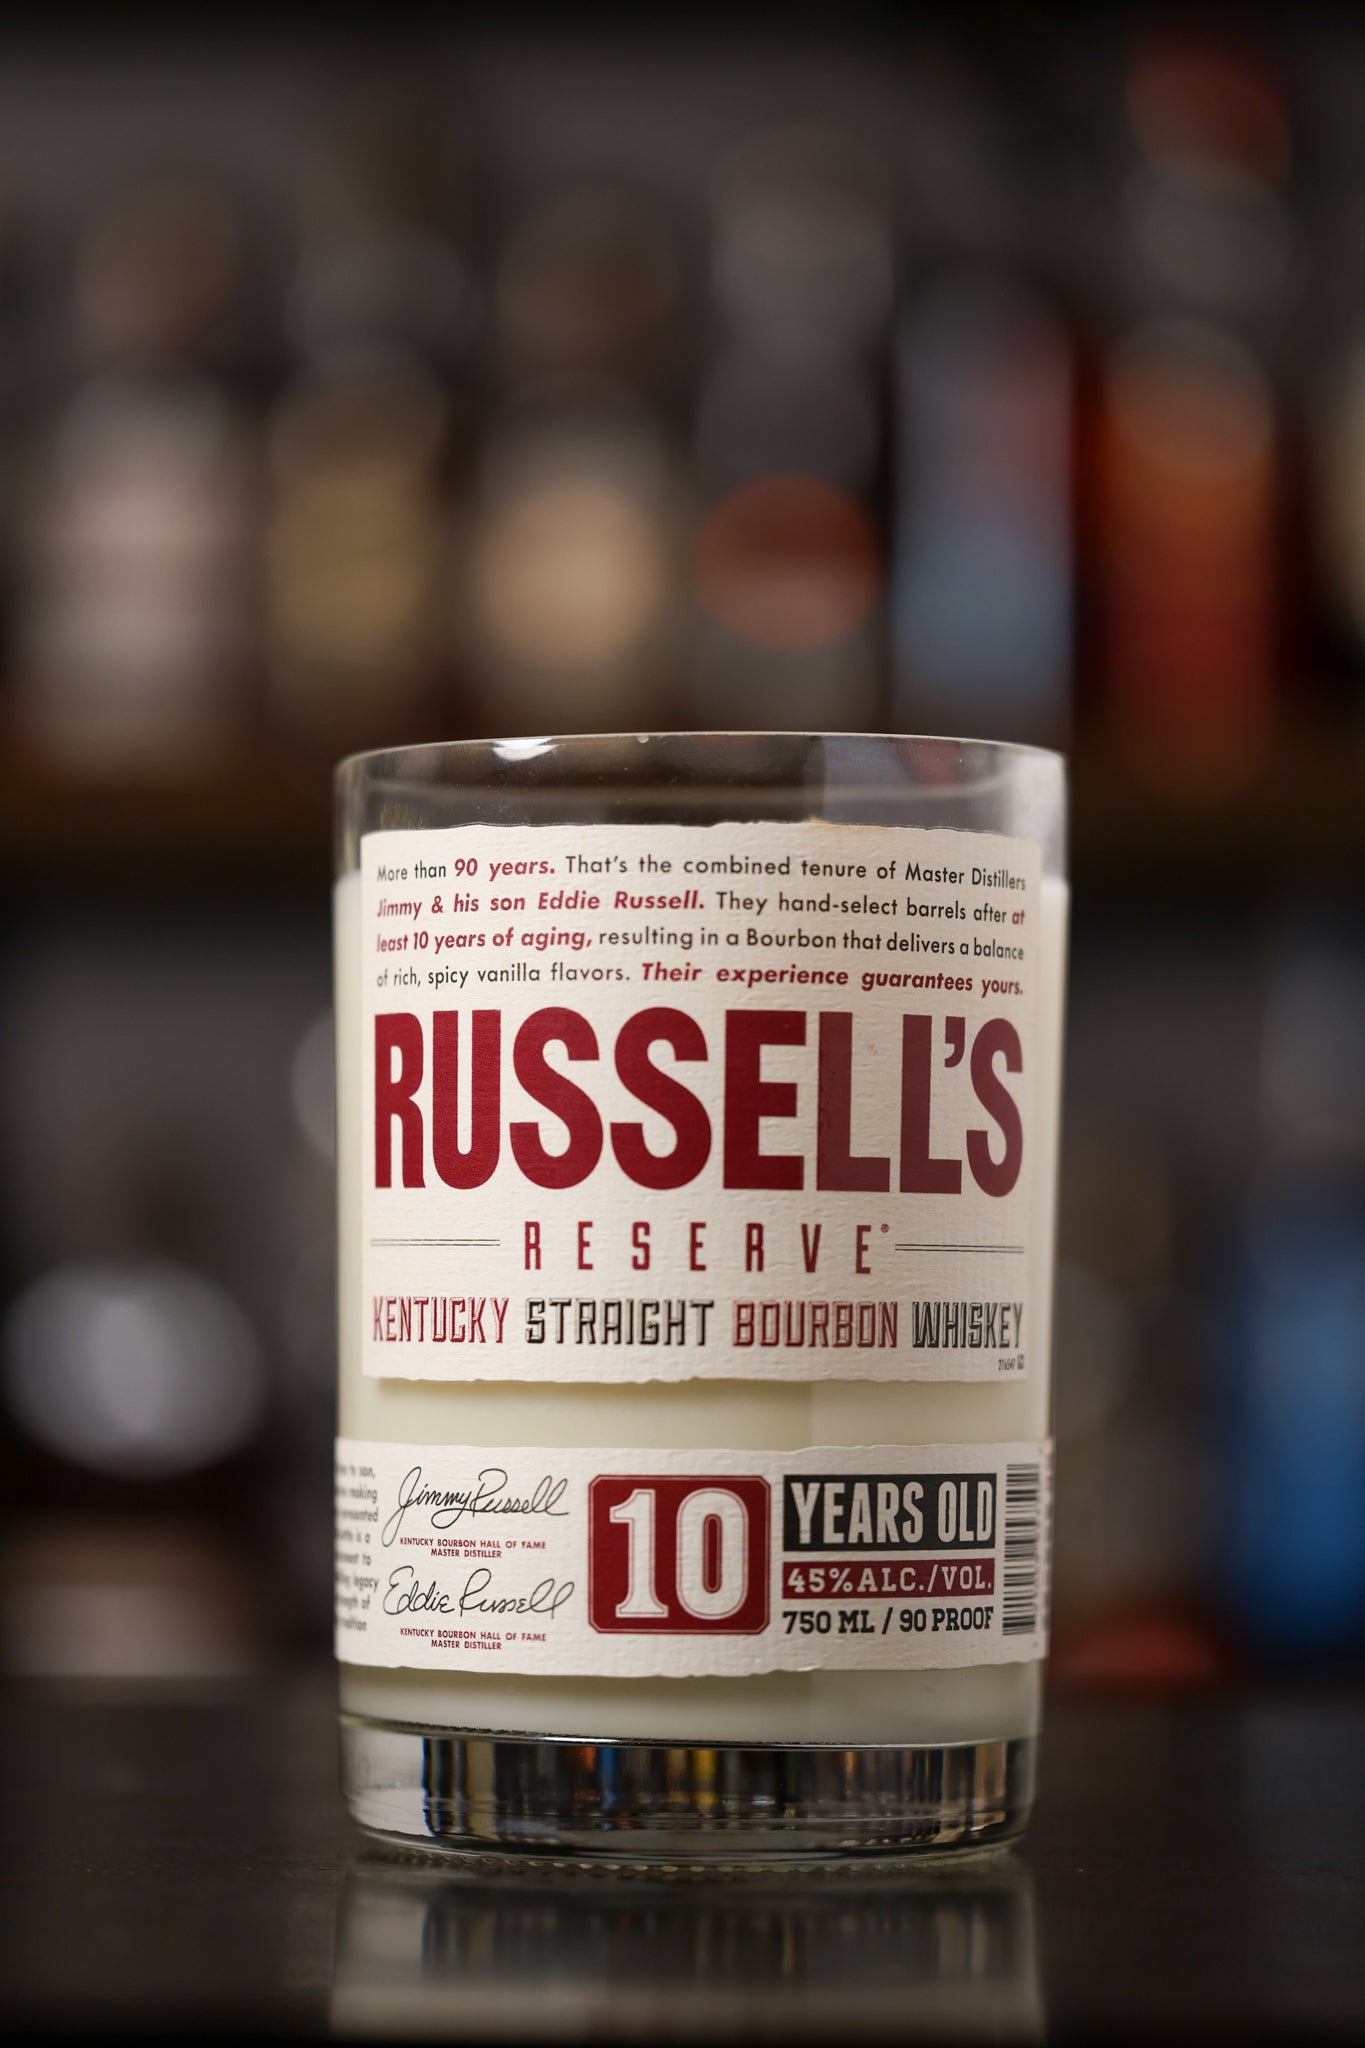 Russell's 10 Year Bourbon Bottle Candle